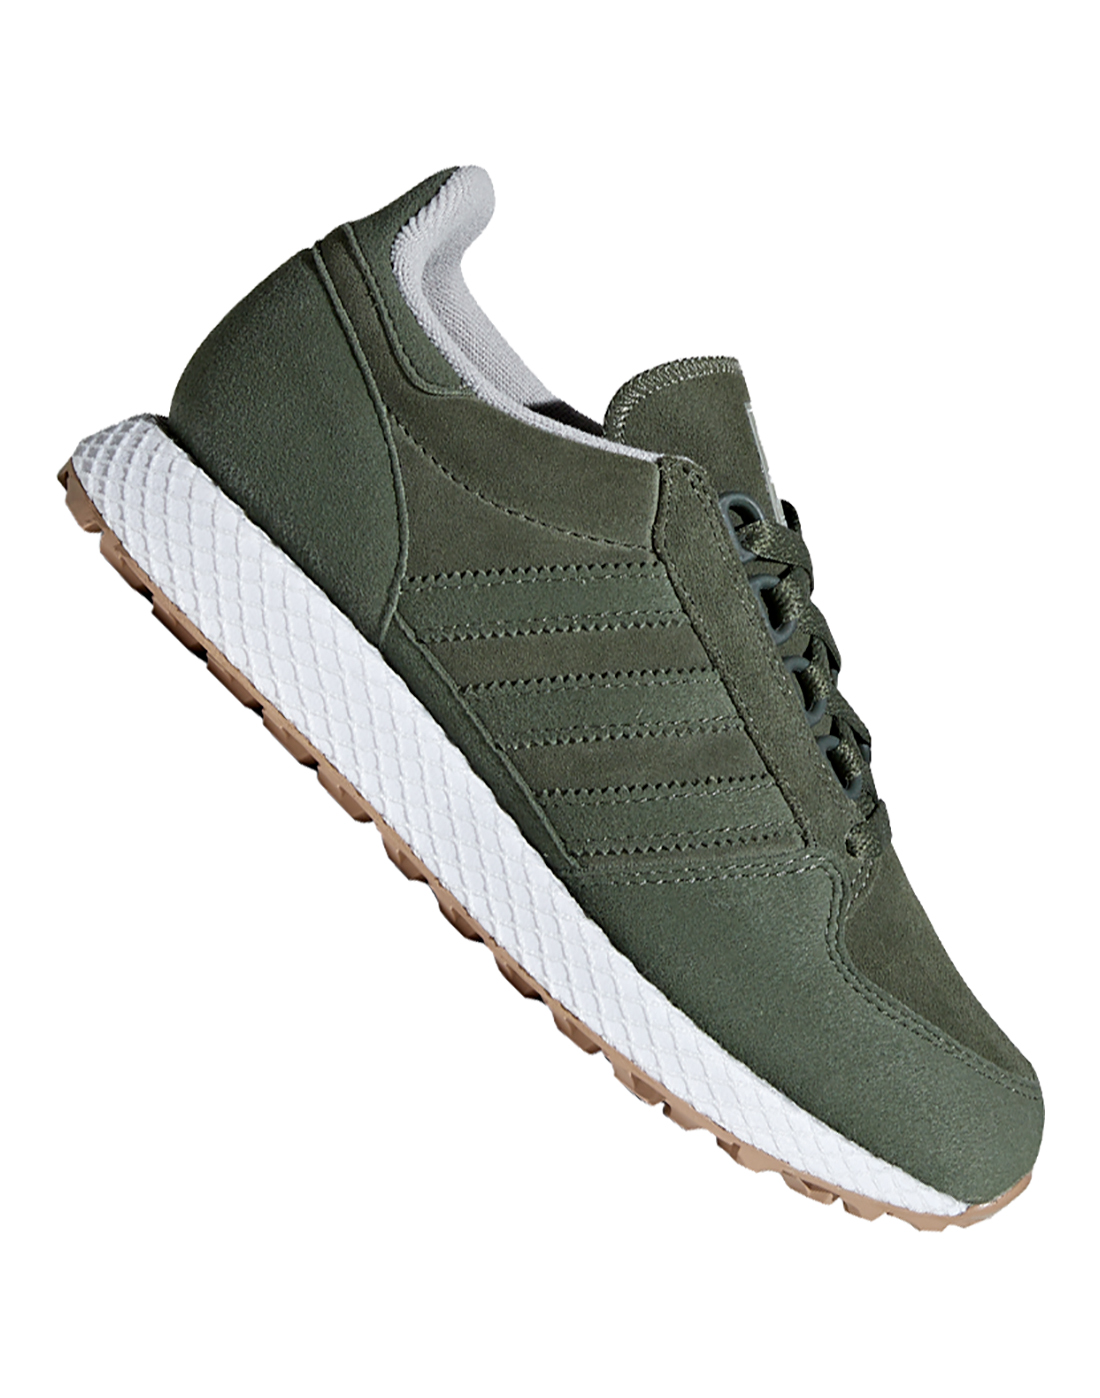 adidas forest grove olive